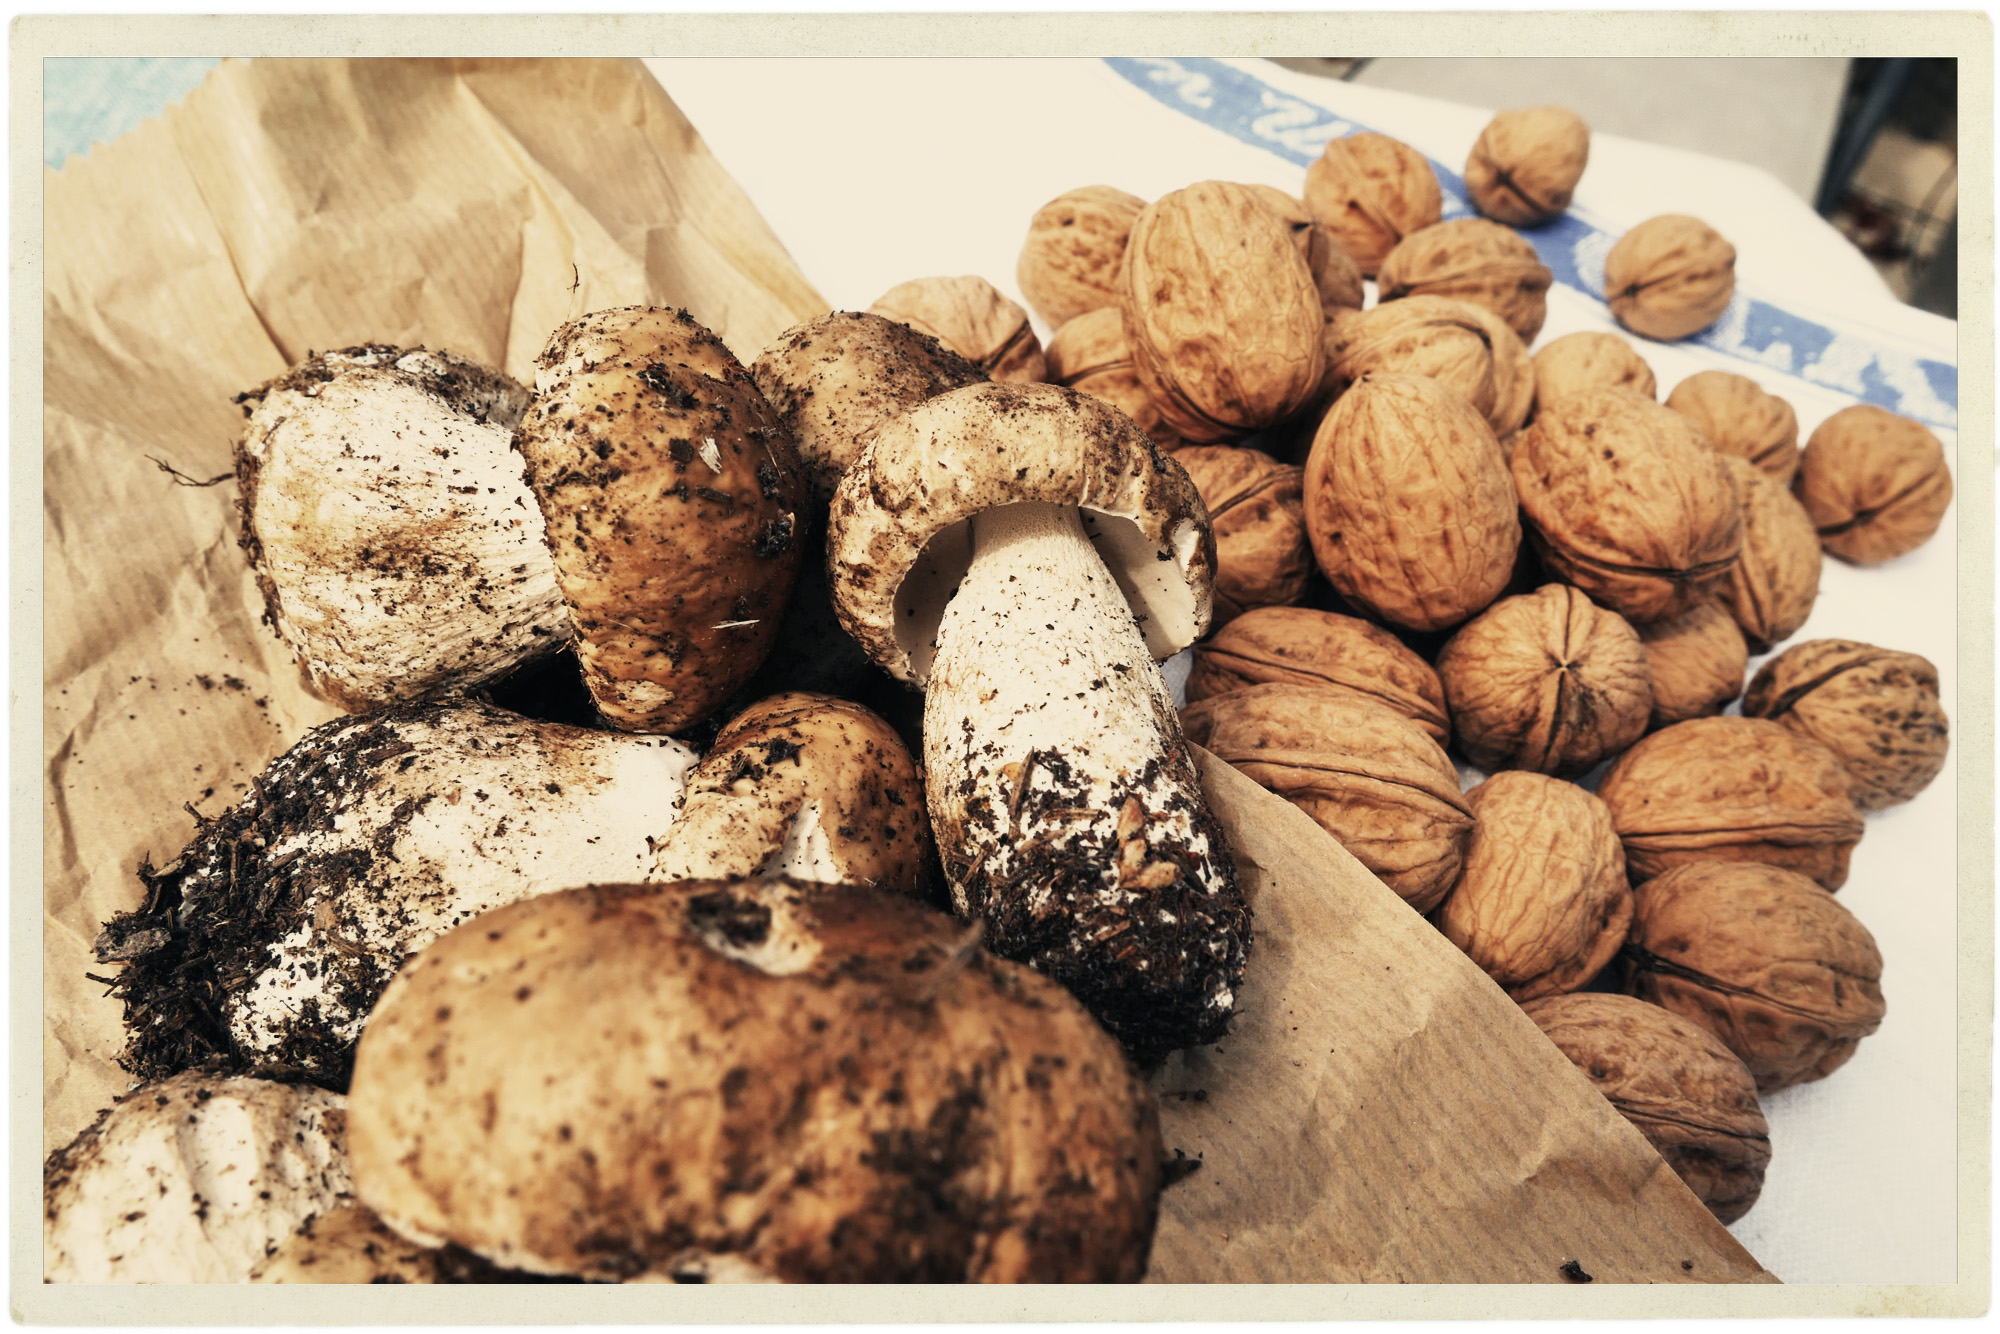 Autumn in Provence means walnuts and cèpes.